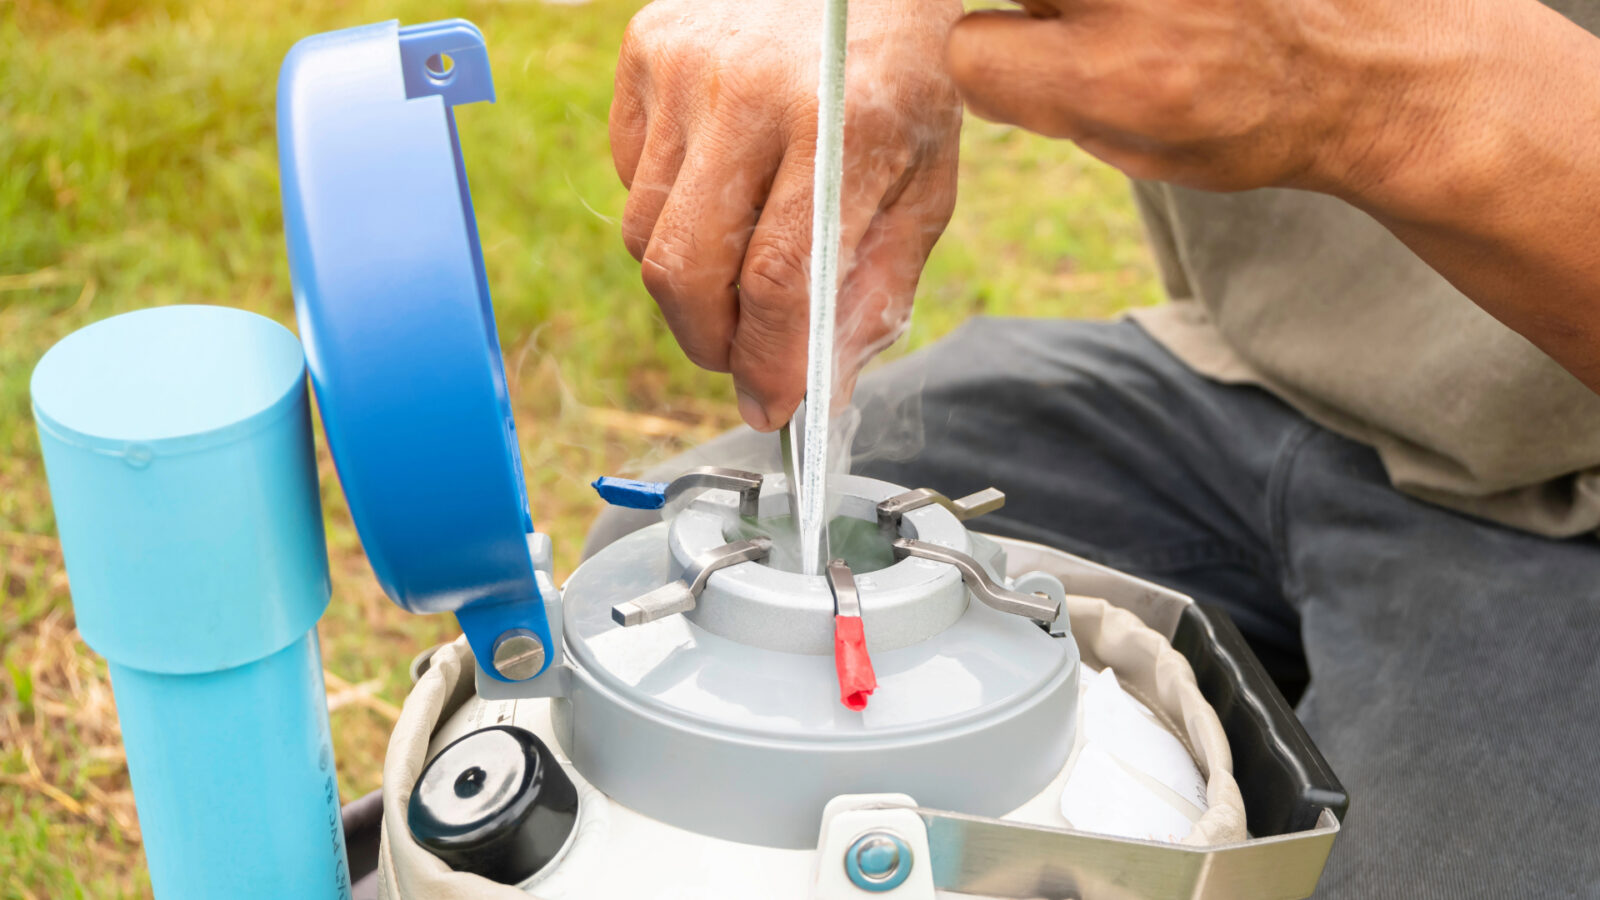 A person calibrating a scientific instrument in an outdoor field setting, pouring liquid from a plastic container into the device's chamber while holding measurement tools and components.